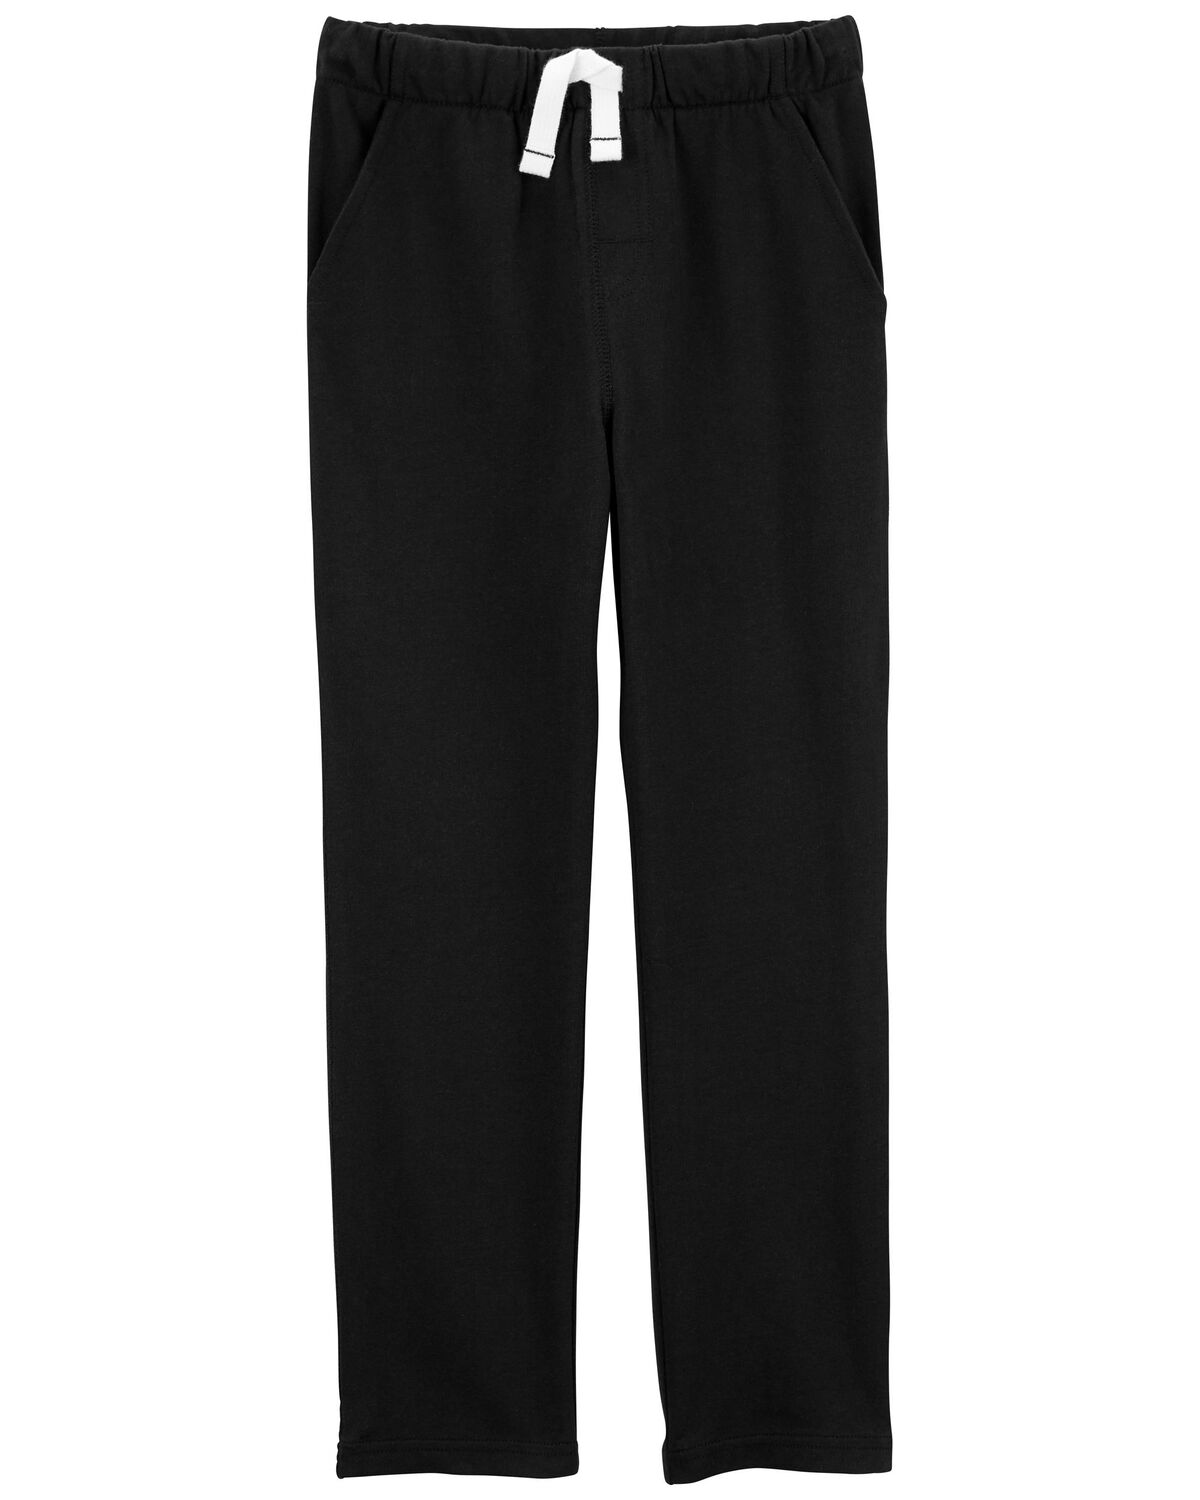 Black Kid Pull-On French Terry Pants | carters.com